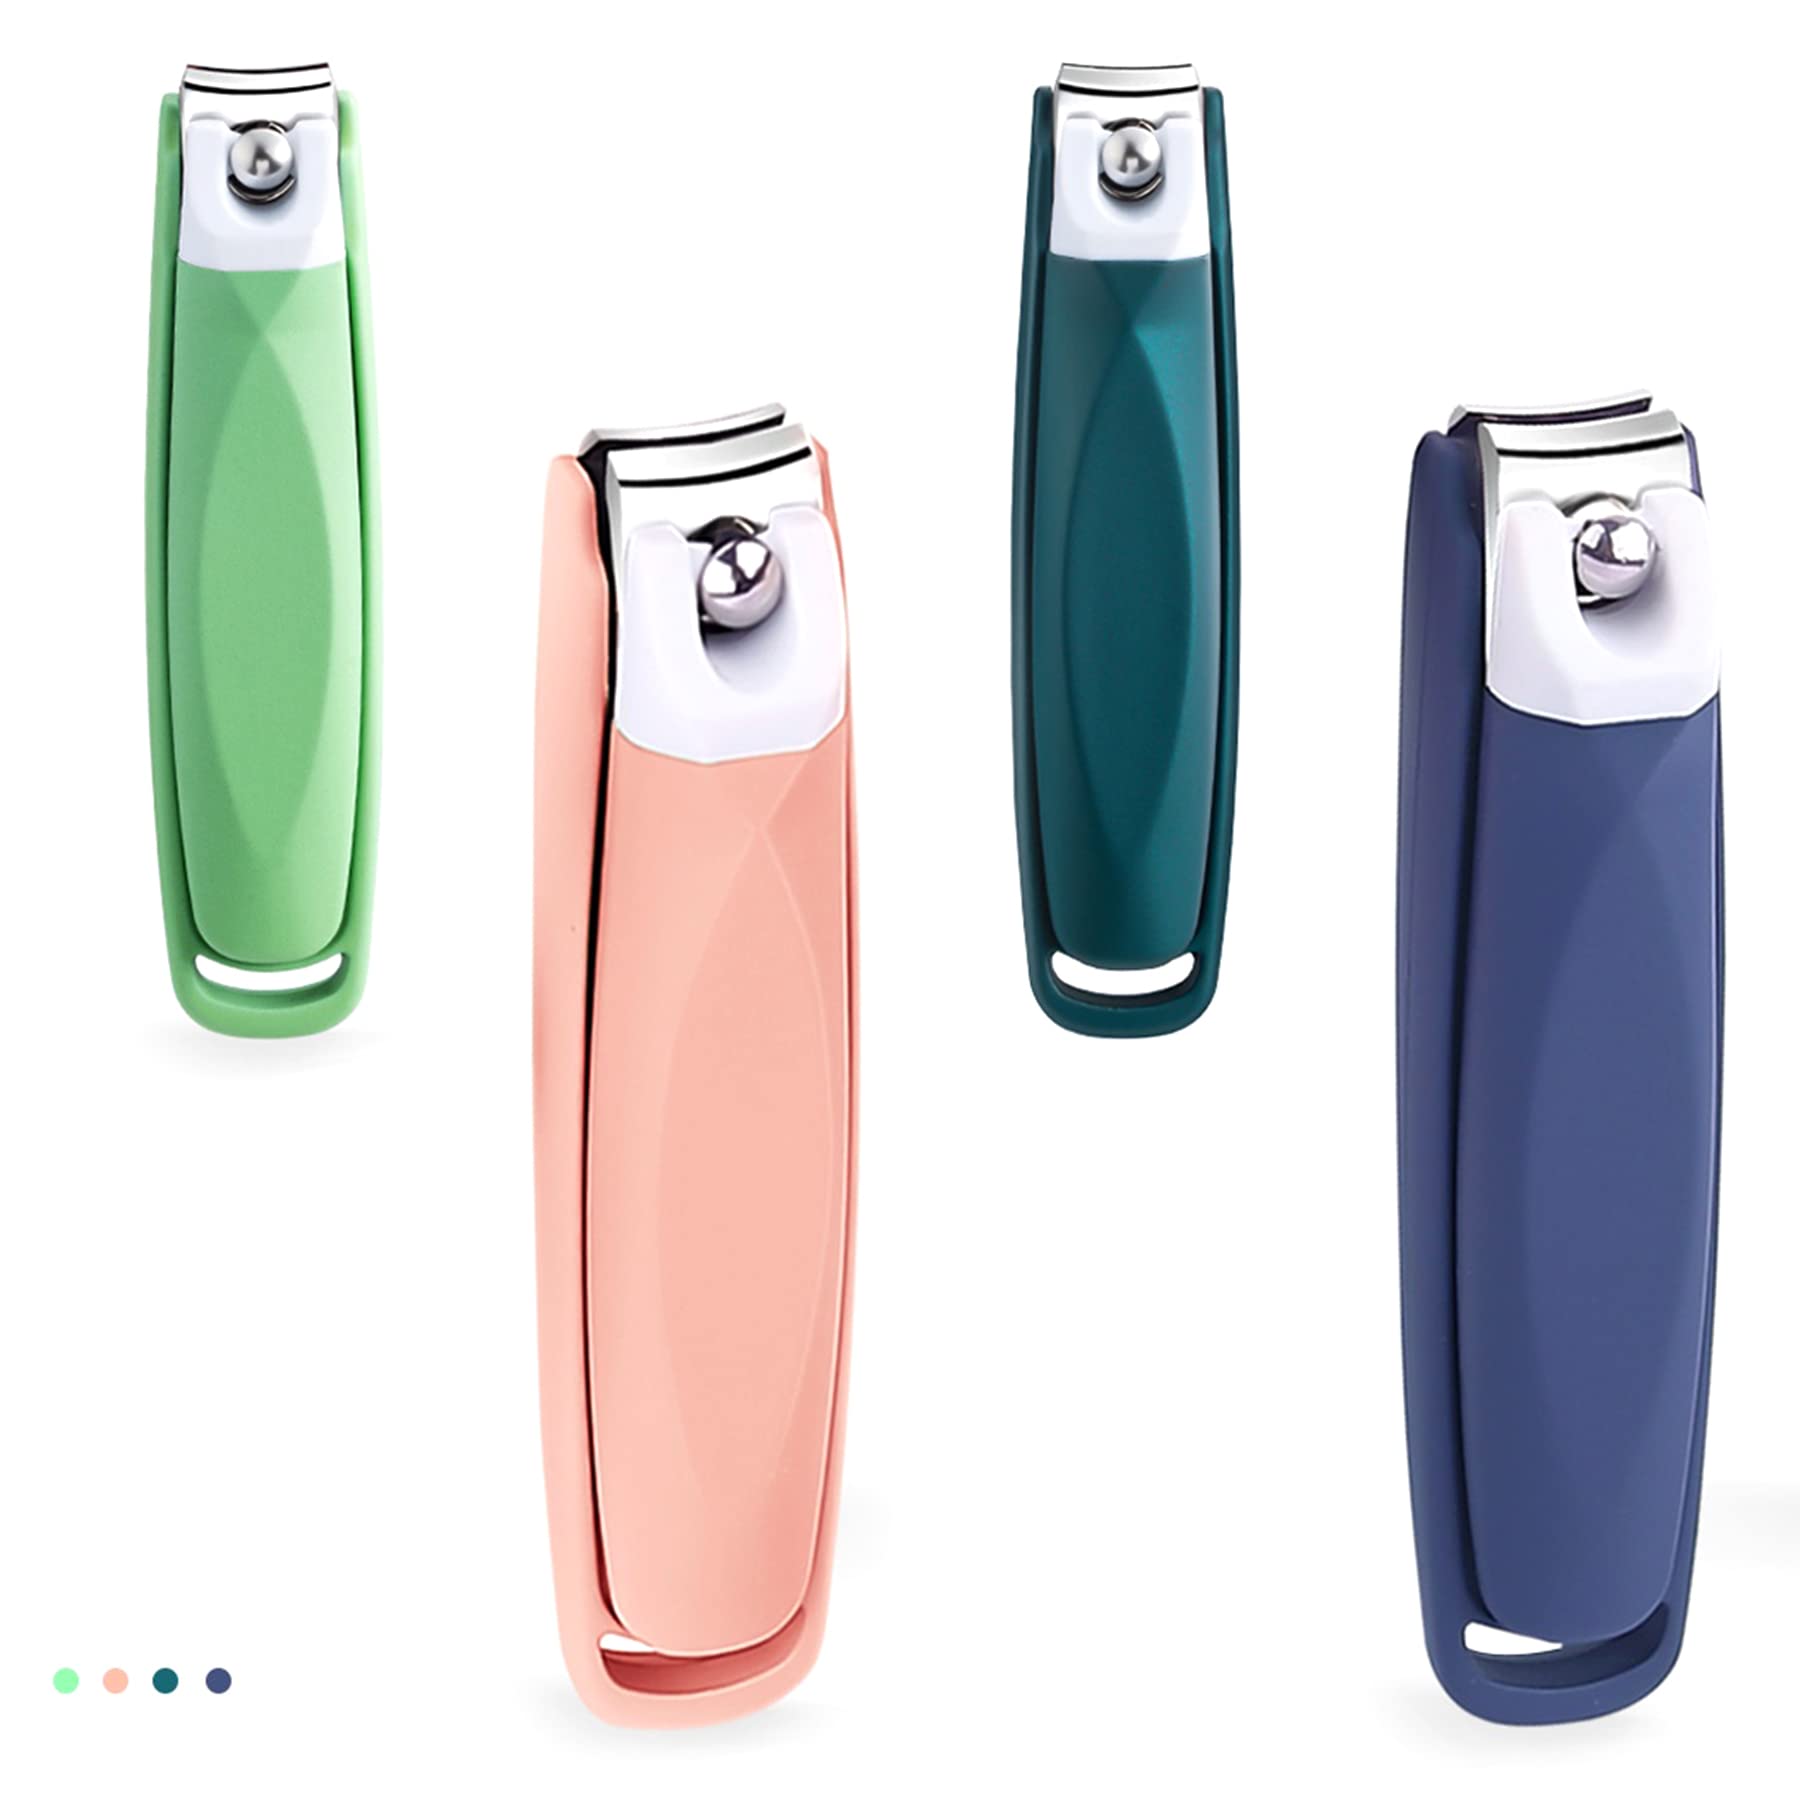 Nail Clippers with Catcher, No Splash Fingernail Toenail Clippers